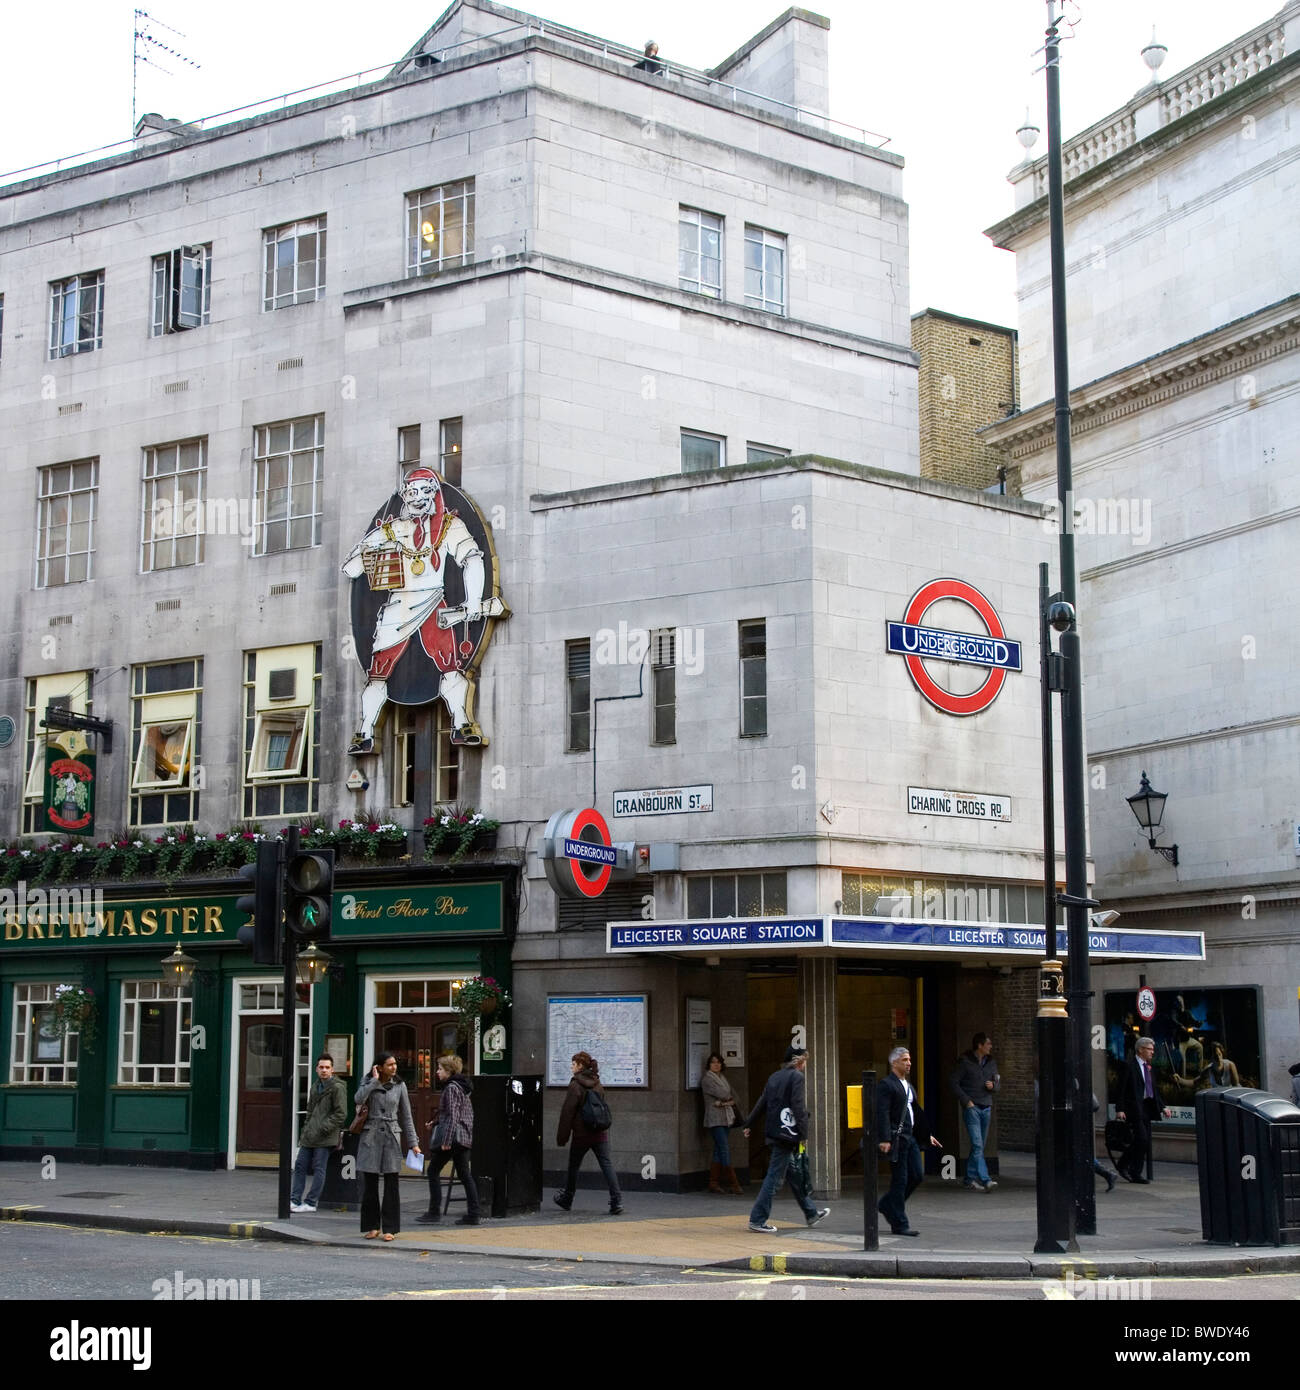 Leicester Square Tube Station Stock Photo: 32883430 - Alamy